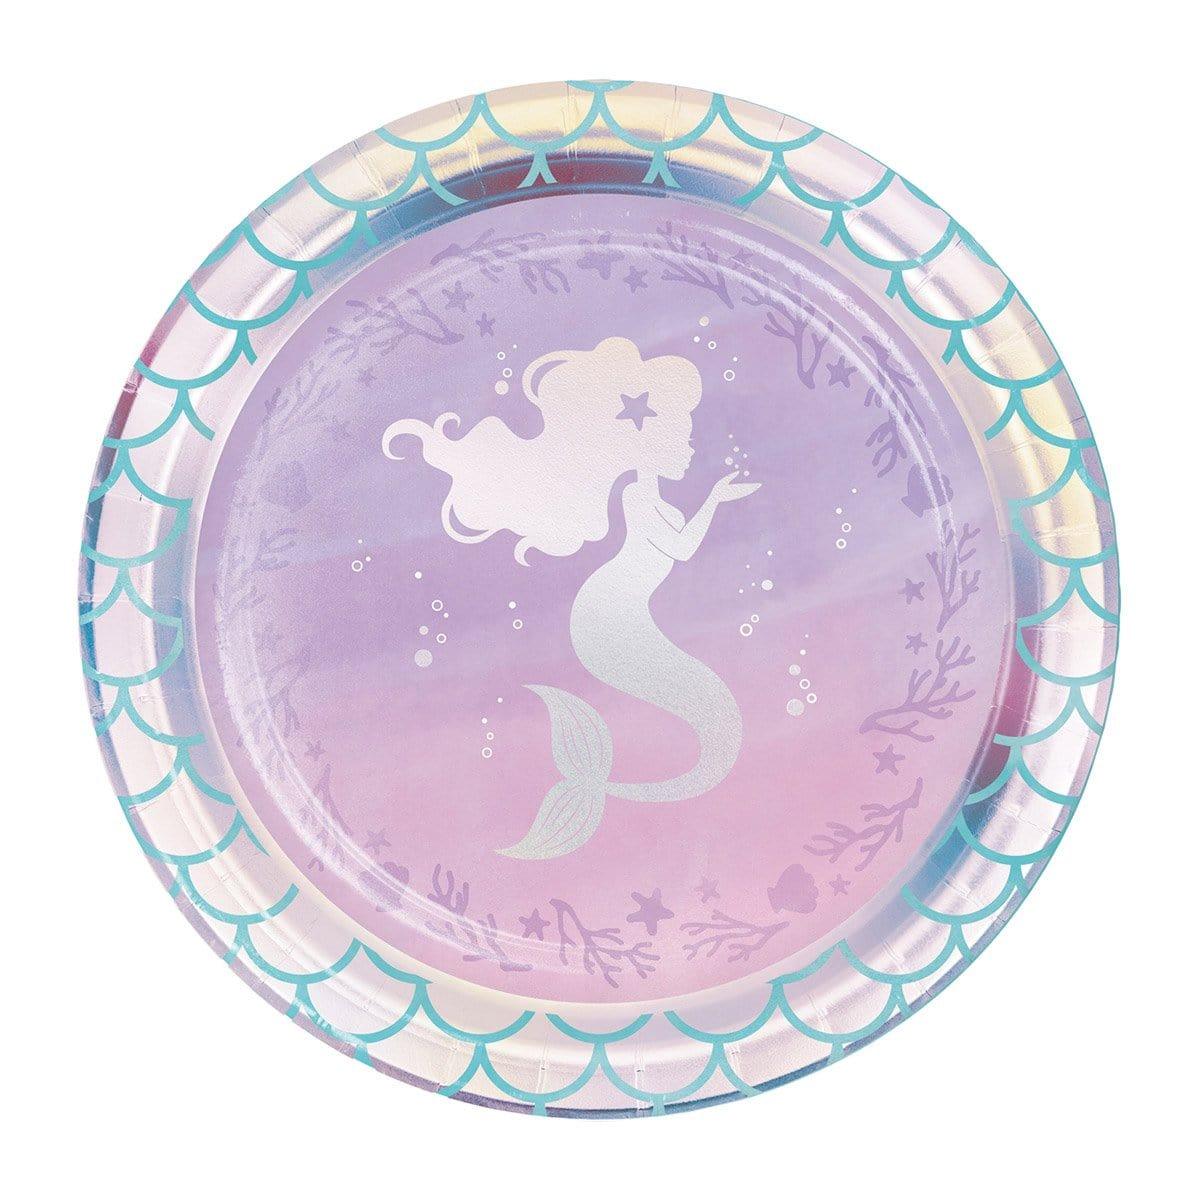 Buy Kids Birthday Mermaid Shine Dessert Plates 7 inches, 8 per package sold at Party Expert